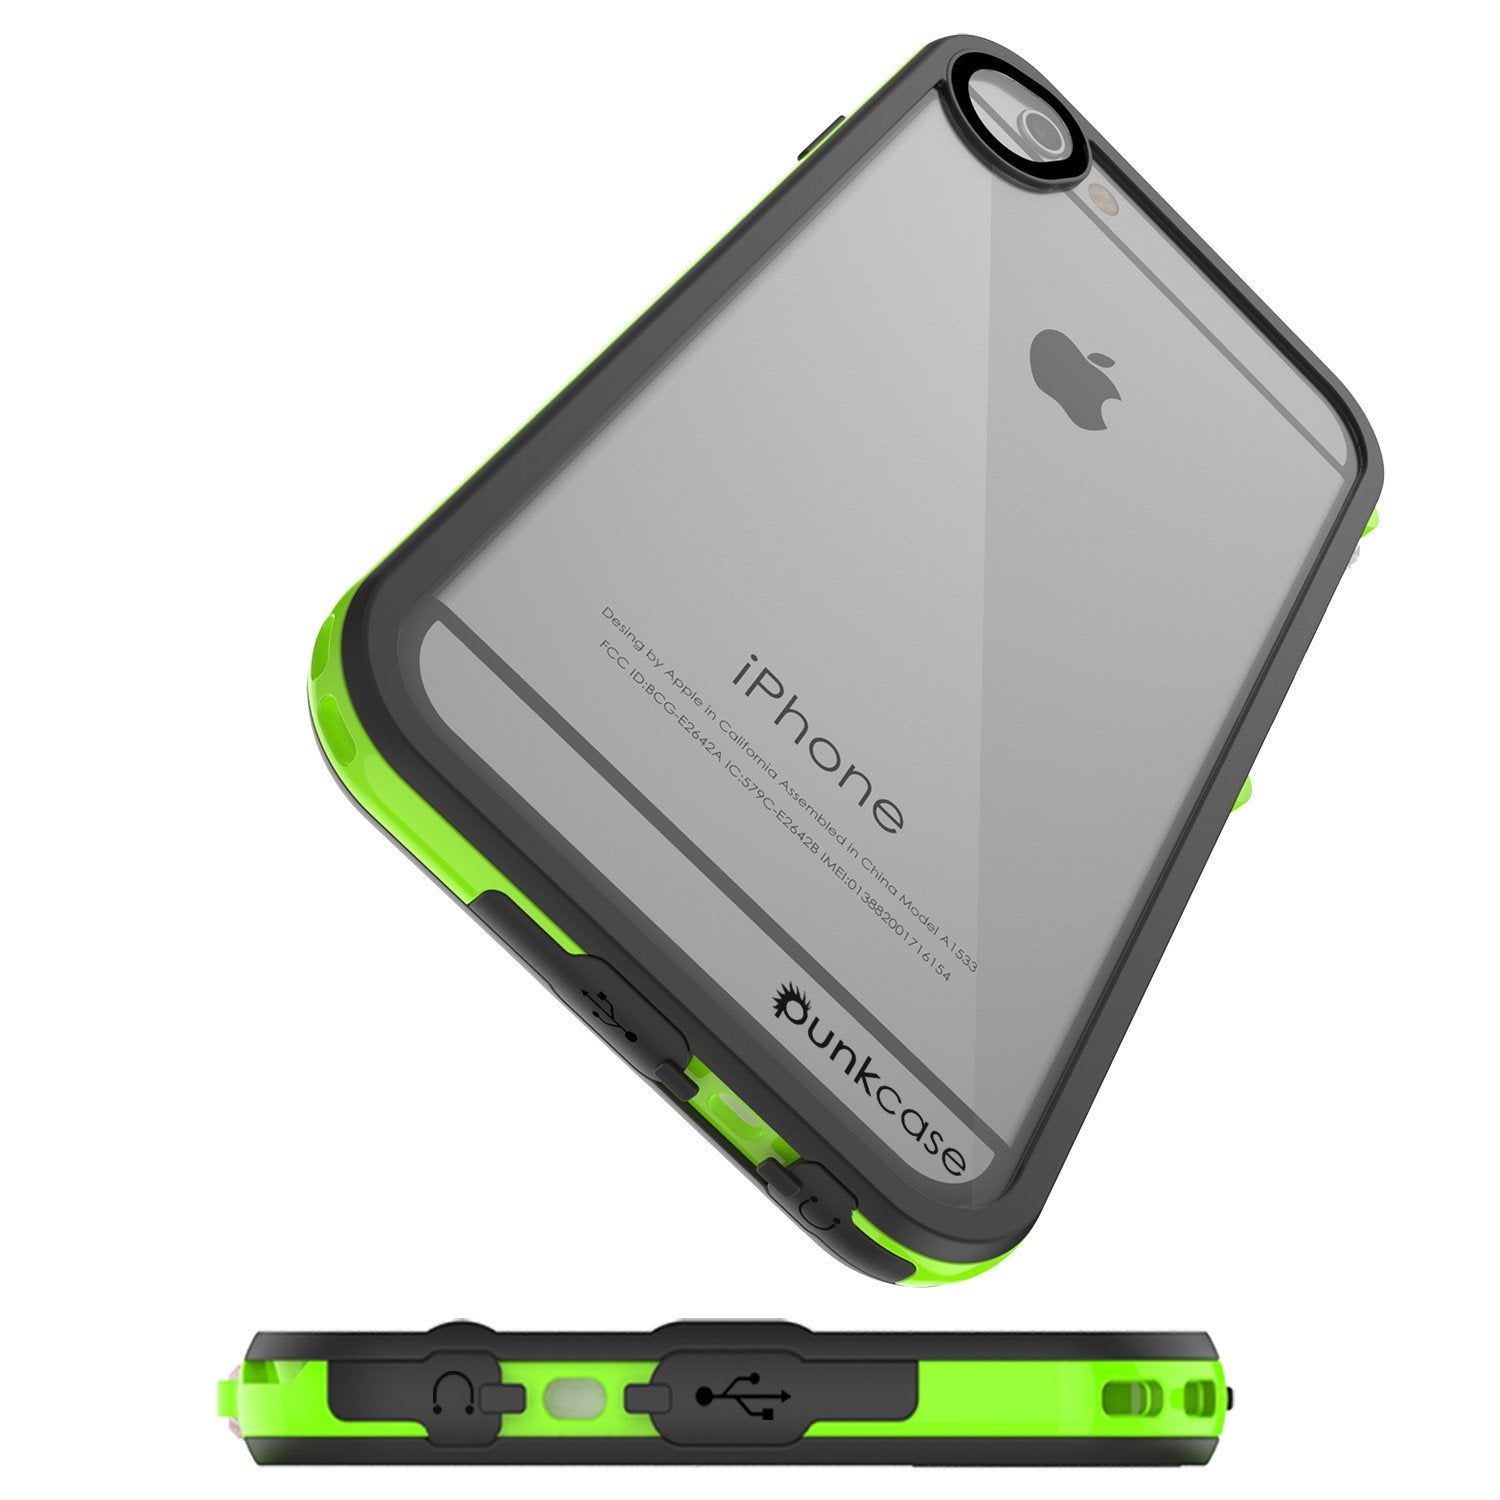 Apple iPhone 7 Waterproof Case, PUNKcase CRYSTAL 2.0 Light Green  W/ Attached Screen Protector  | Warranty - PunkCase NZ